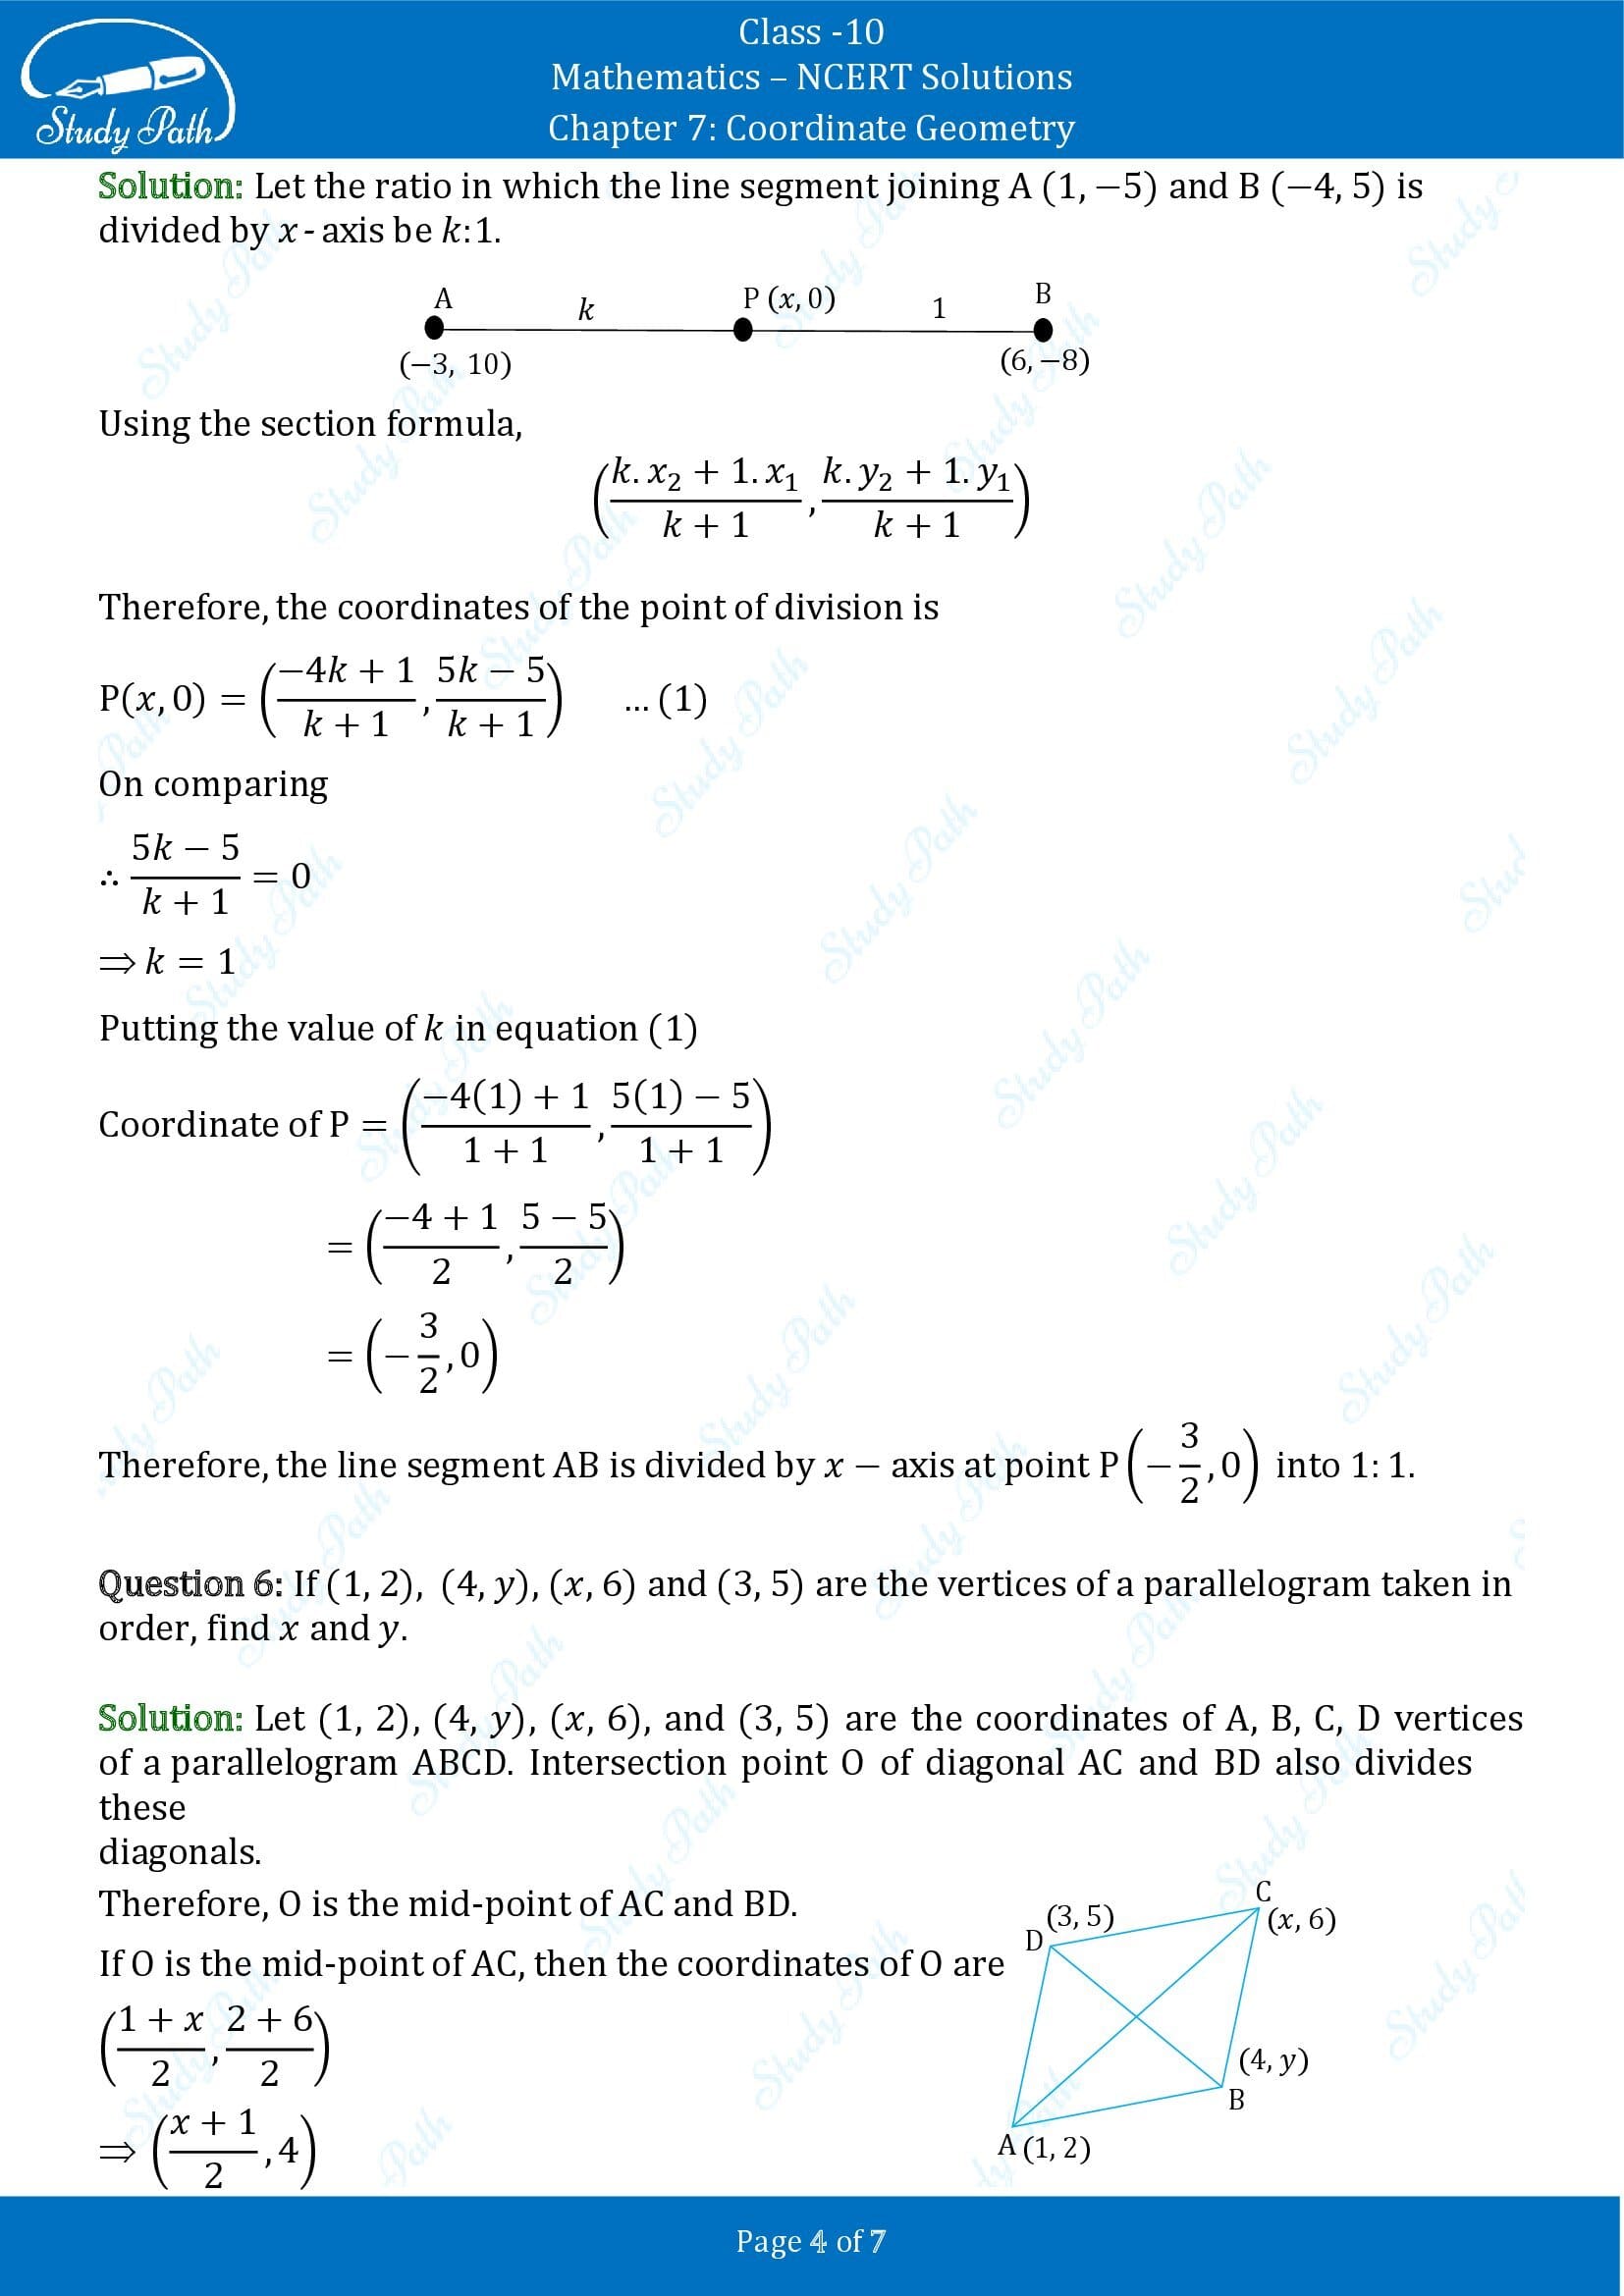 NCERT Solutions for Class 10 Maths Chapter 7 Coordinate Geometry Exercise 7.2 00004